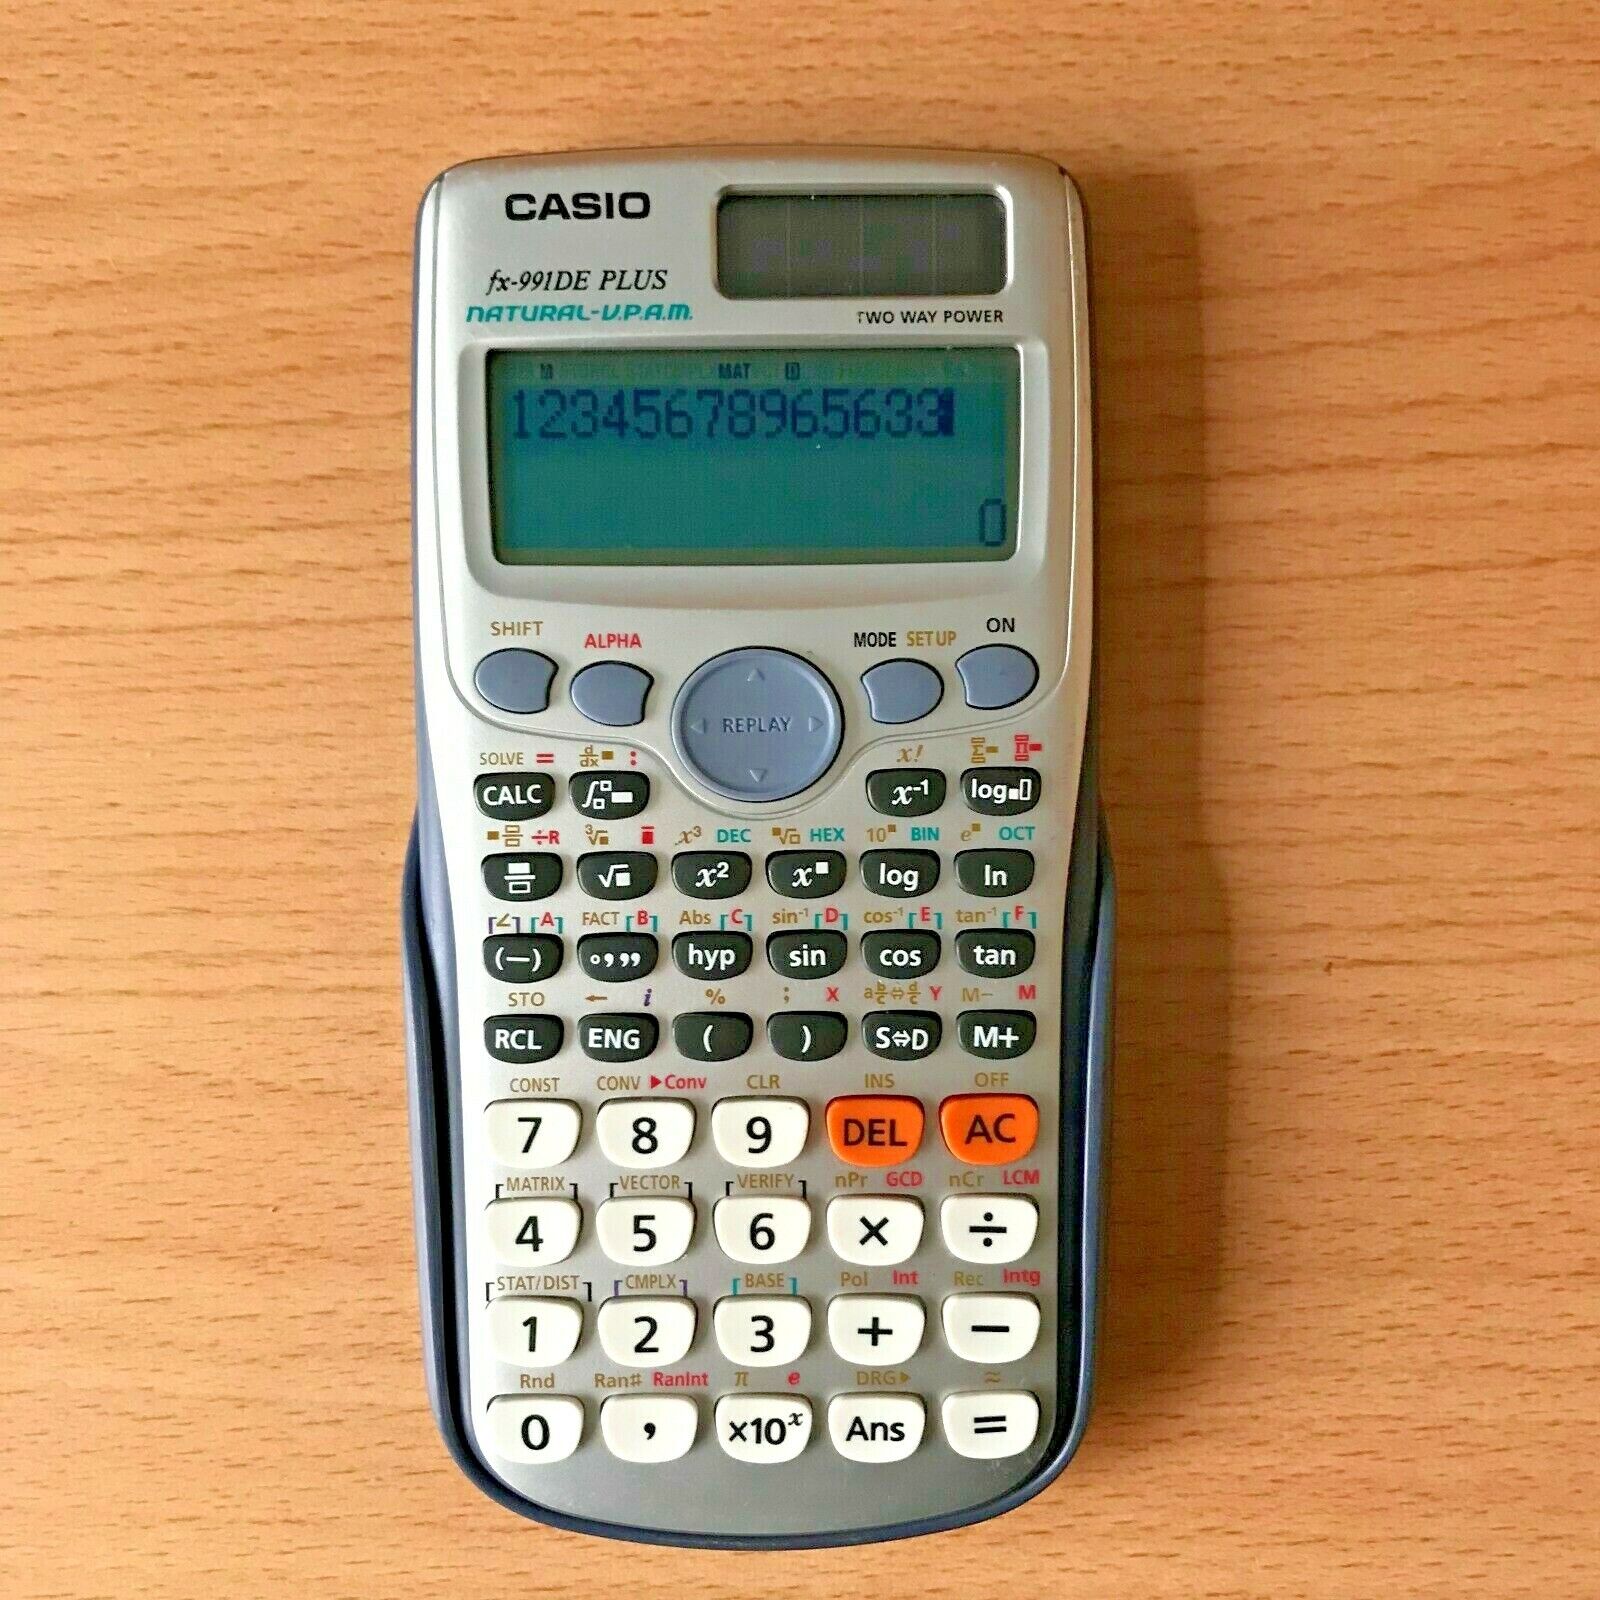 Casio Scientific Calculator (fxES PLUS-4 INITURA-UPAR) Functions With Two Way Power